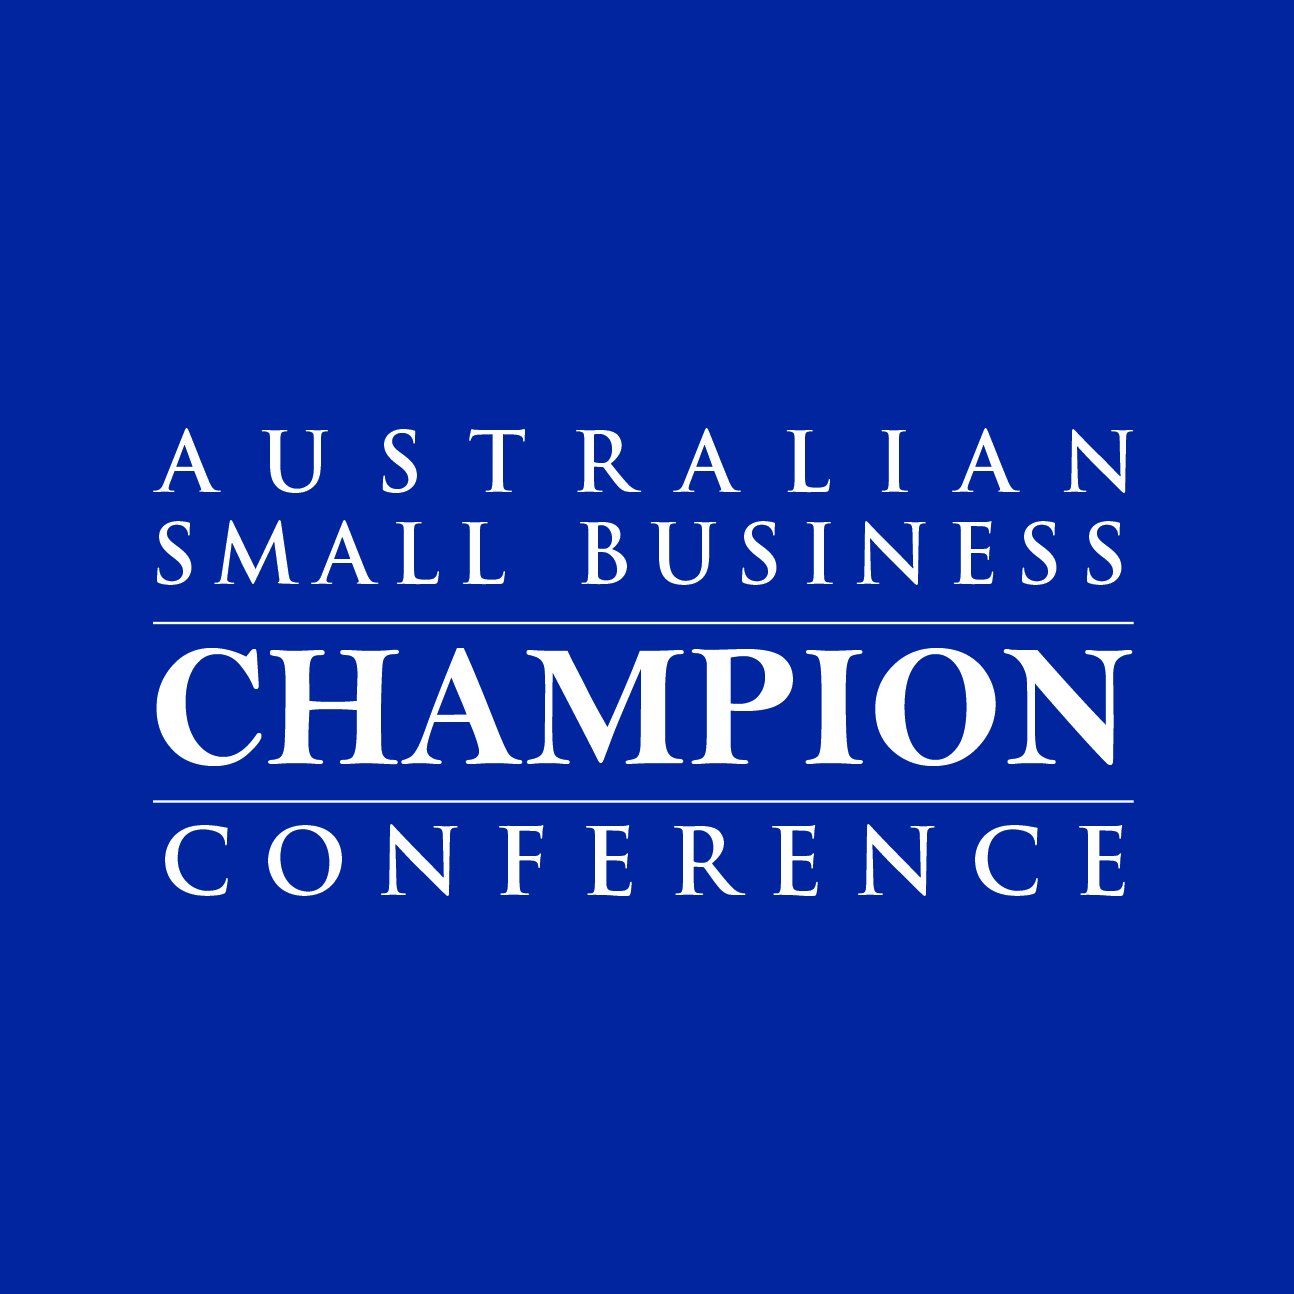 The Australian Small Business Champions Conference offers small business owners all they need to grow, shape and plan their business progress.